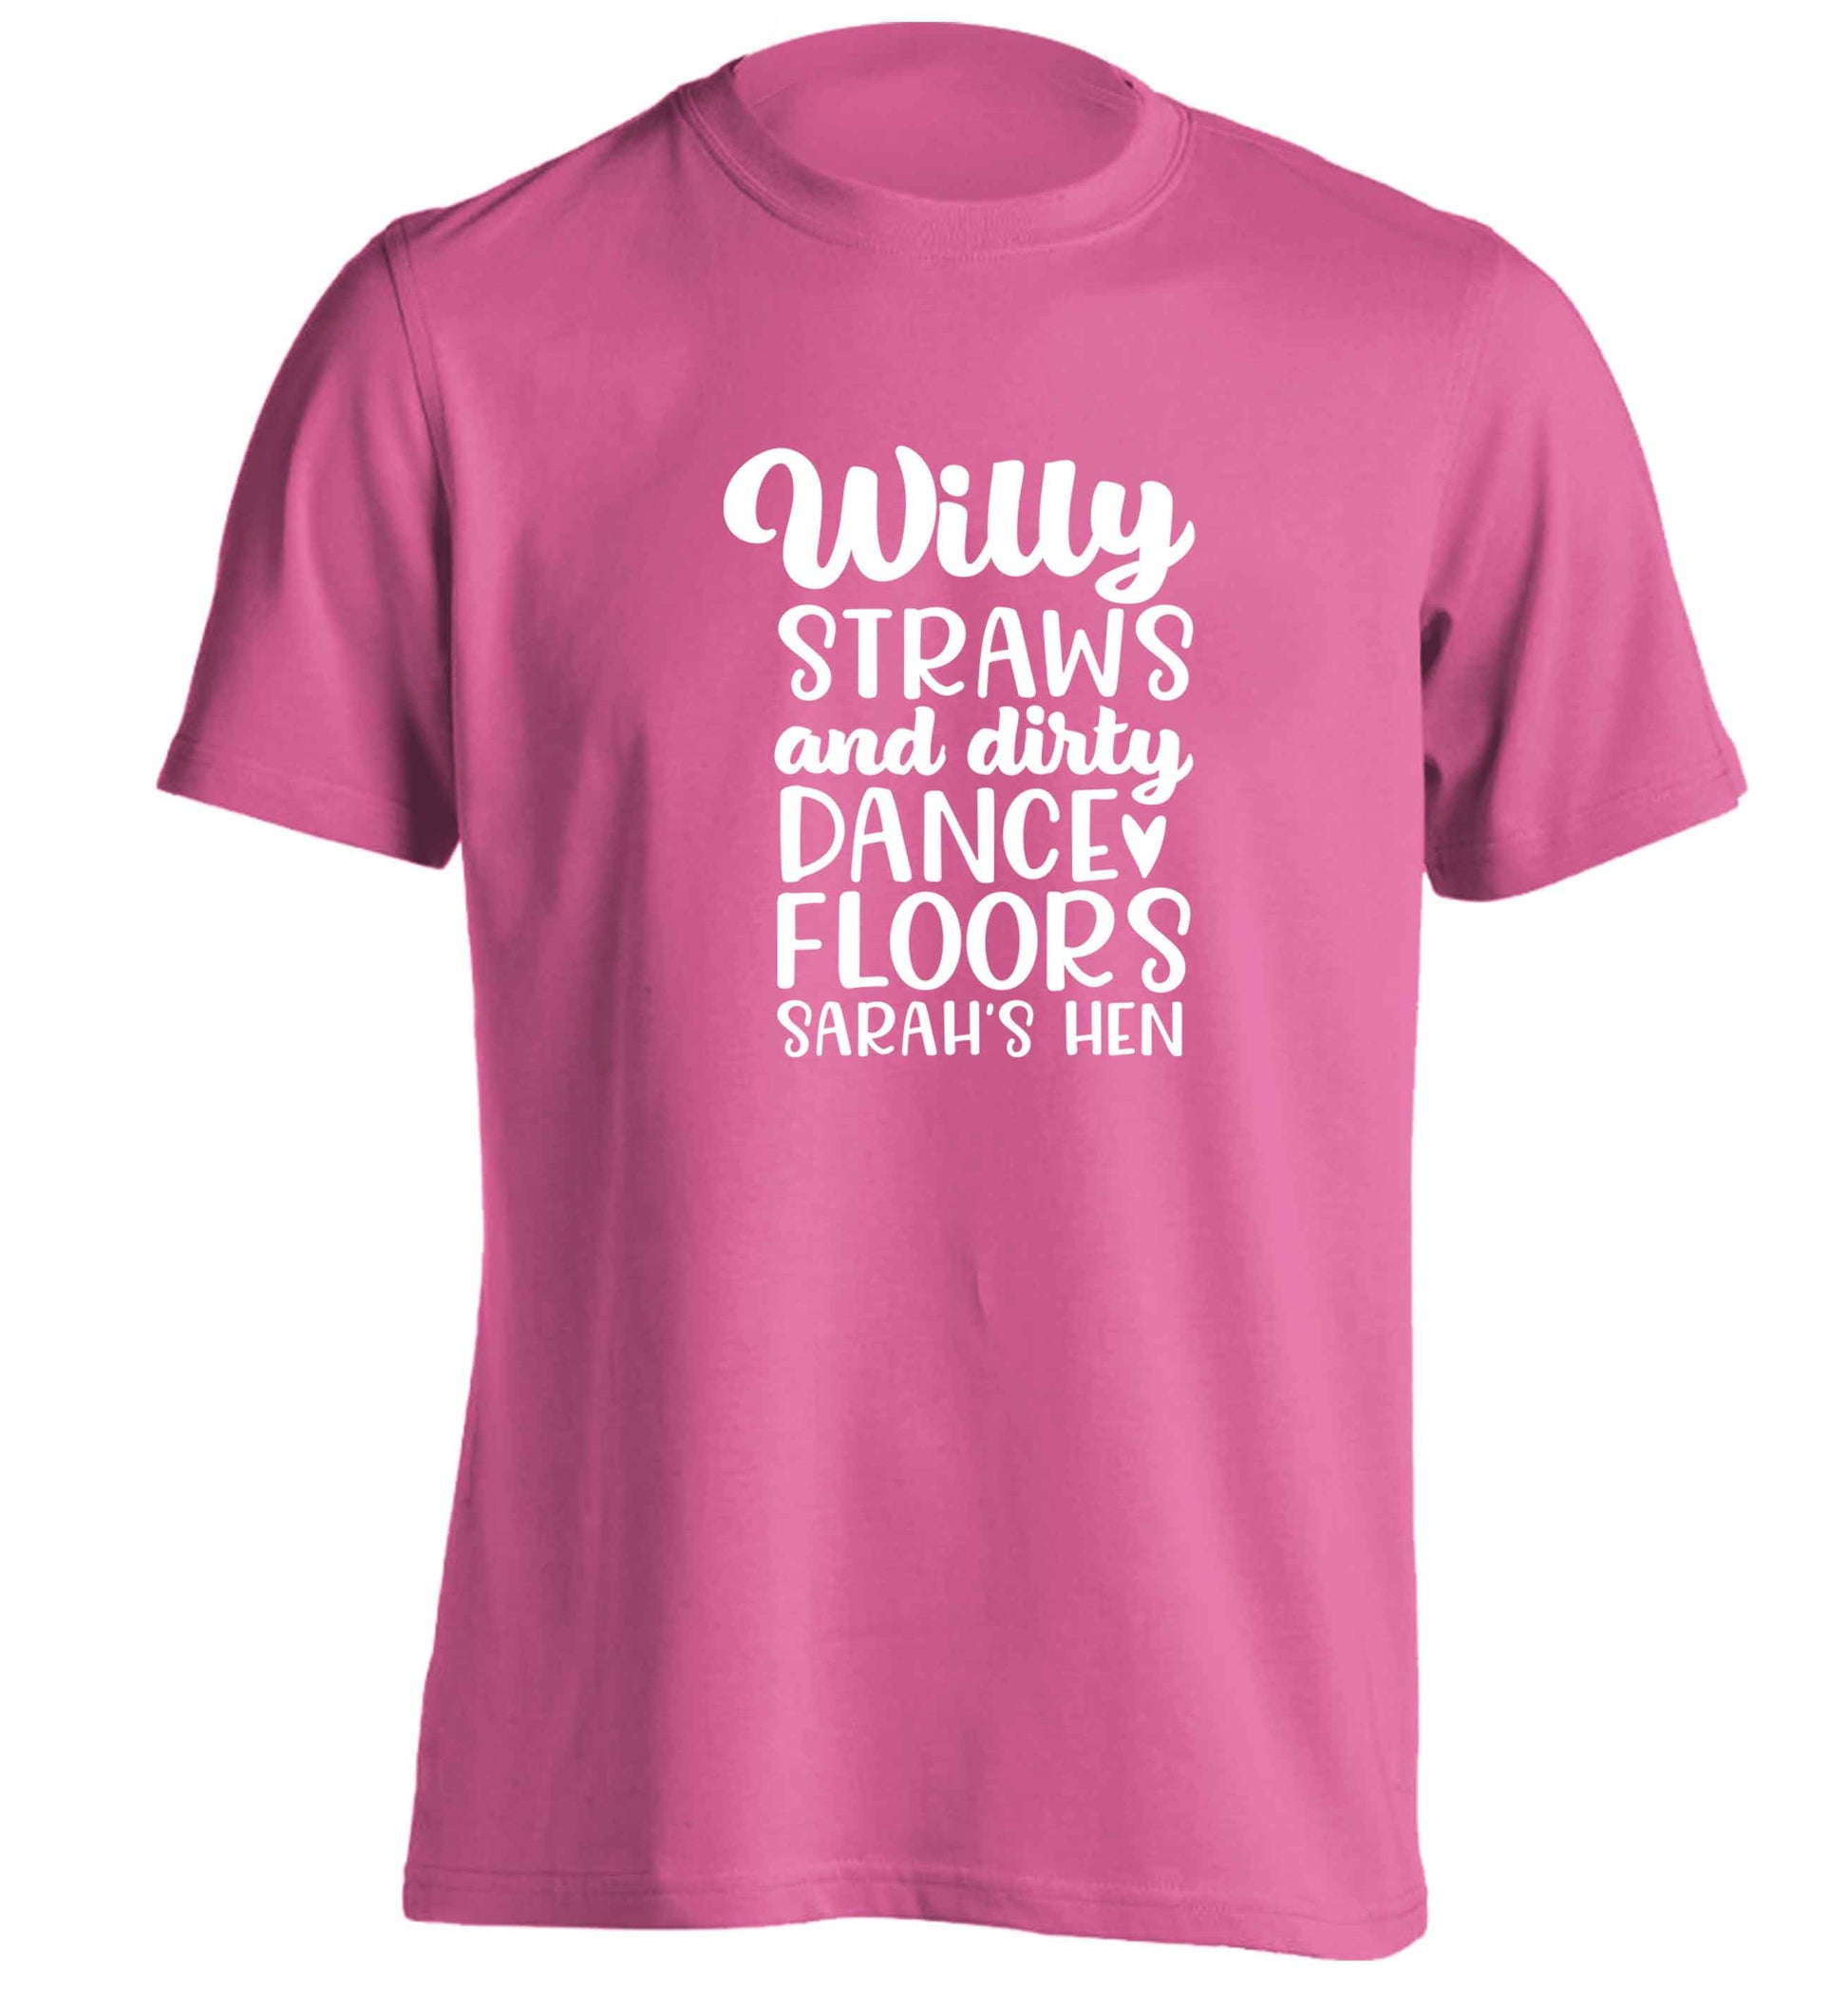 Willy straws and dirty dance floors adults unisex pink Tshirt 2XL